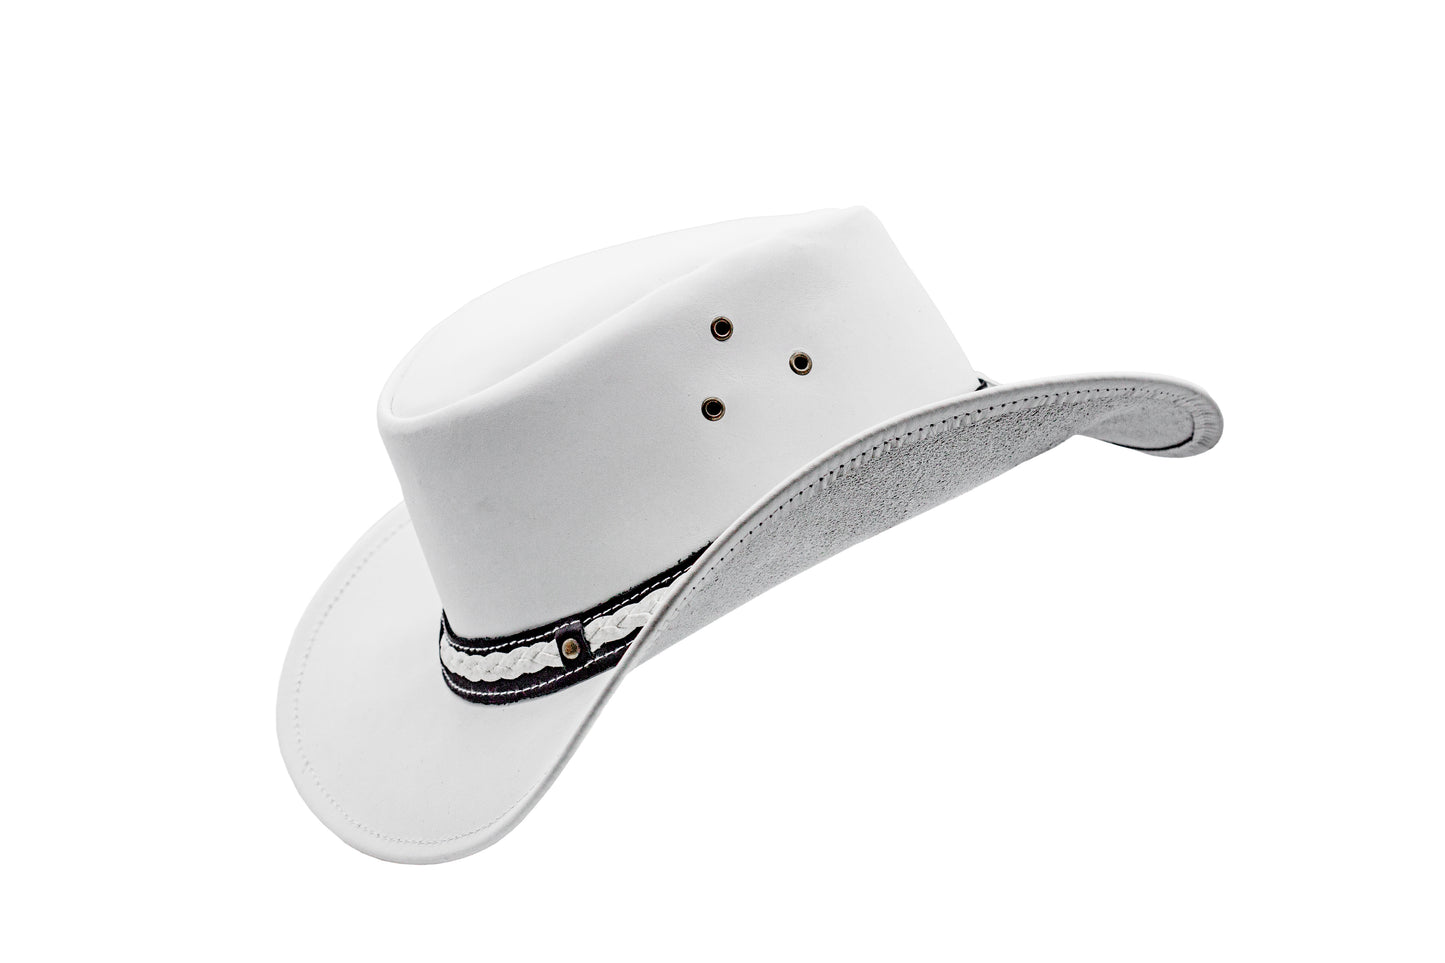 white leather cowboy hat western style shapeable as outback best gift for men women him her mom dad boyfriend girlfriend friends 